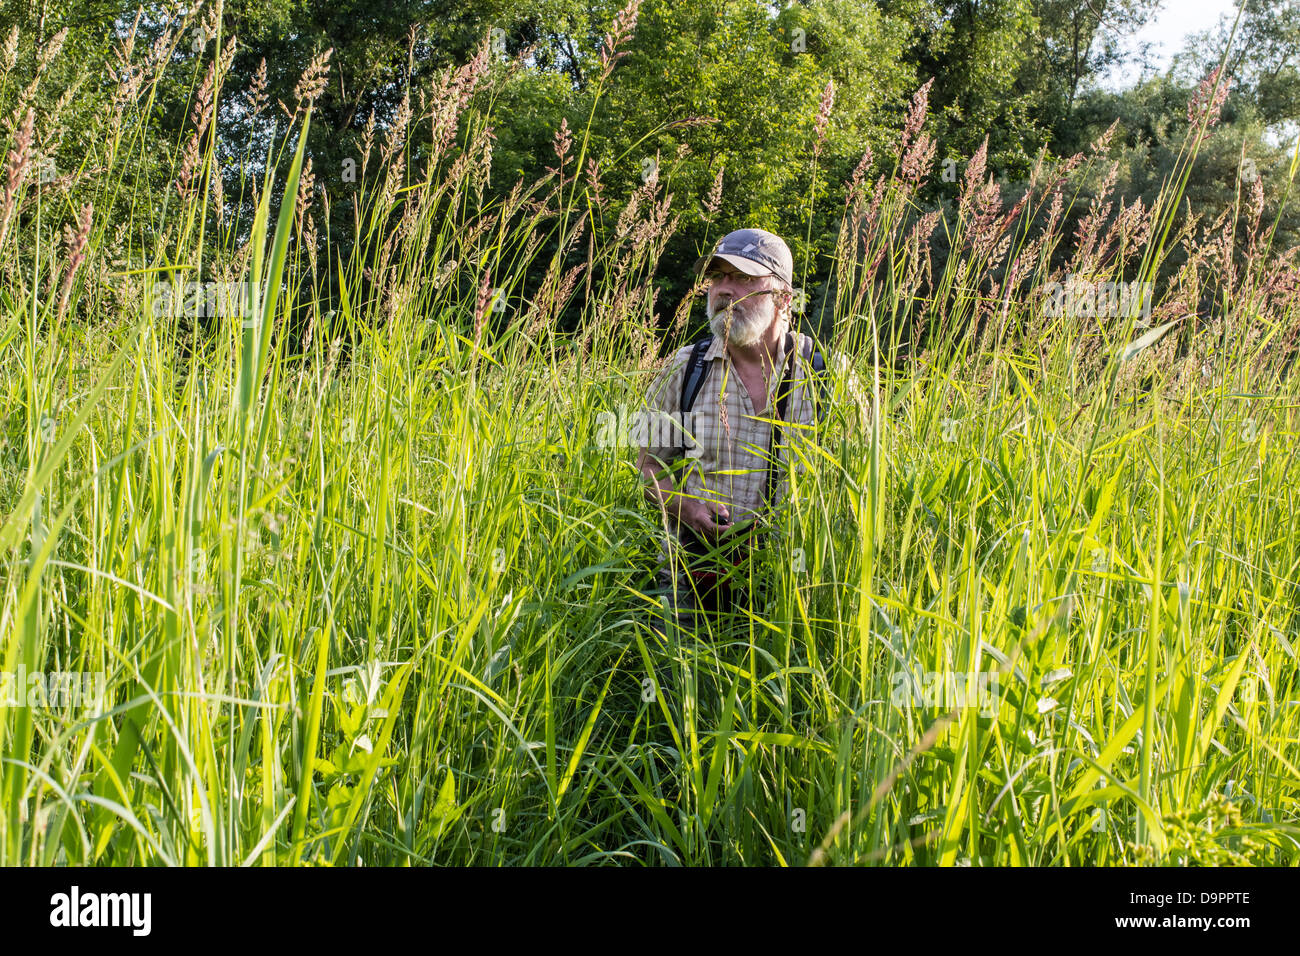 Calamagrostis arundinacea or reed grass. The man in the tall grass on a summer meadow Stock Photo